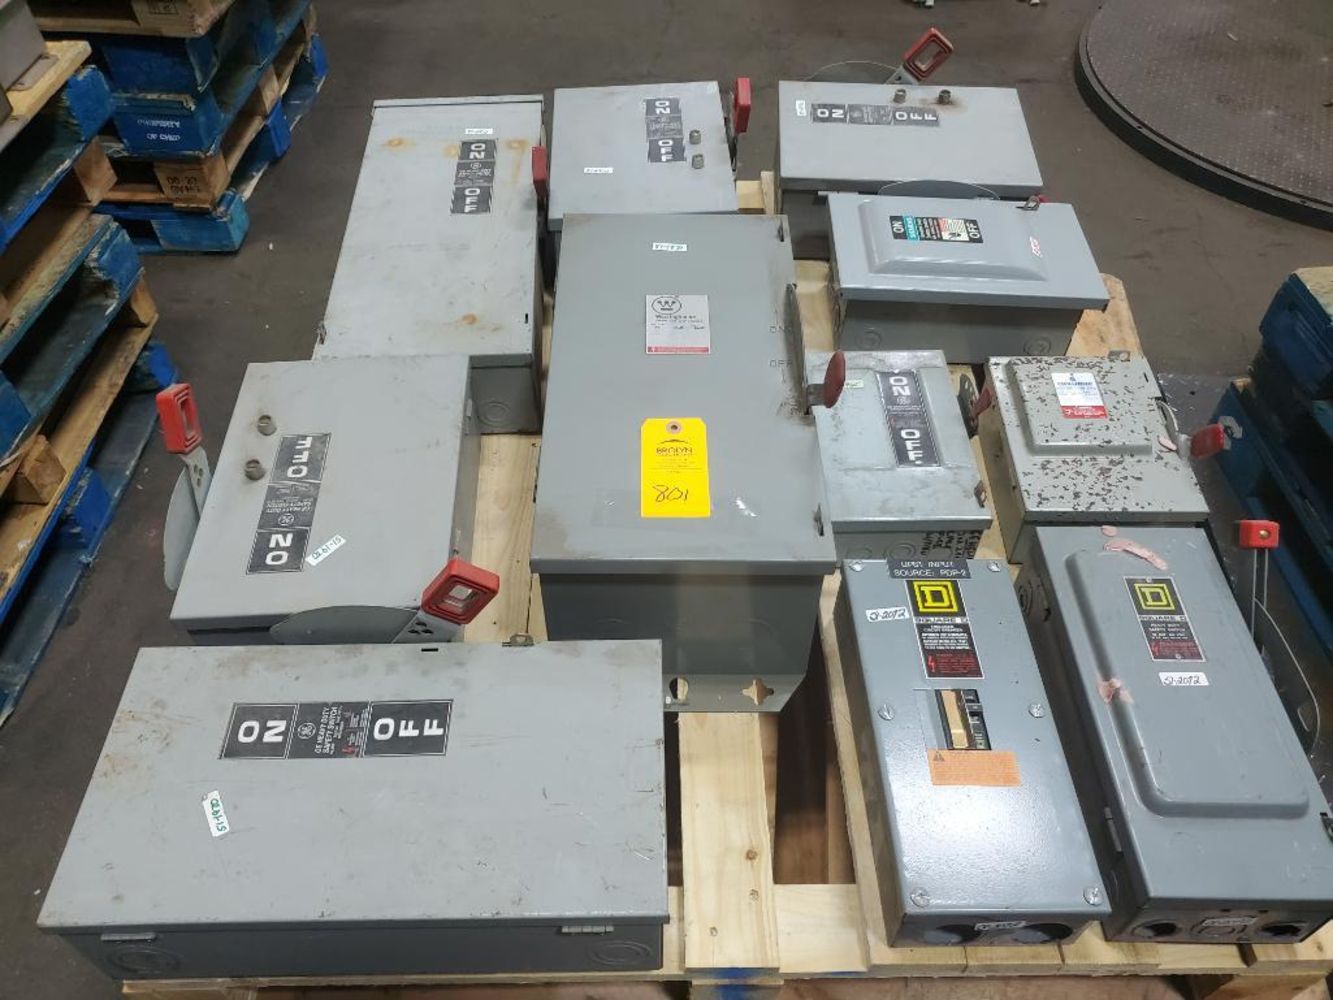 Complete Liquidation of Concepts Industrial - Auction 1 - Day 2